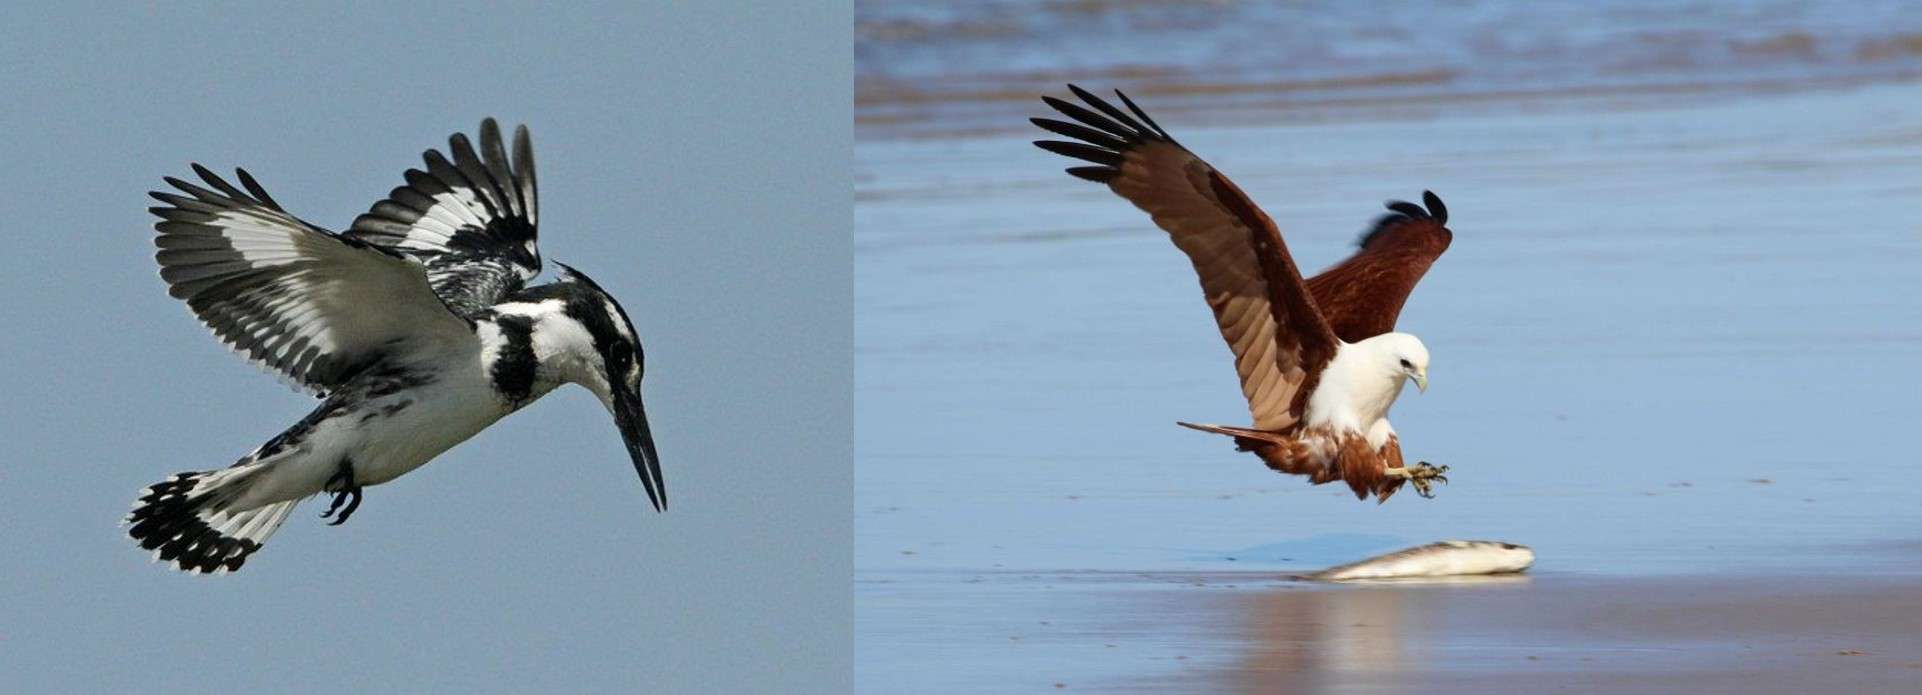 Lesser Pied Kingfisher and Brahminy Kite overcoming Refraction | By Dr. Raza H Tehsin